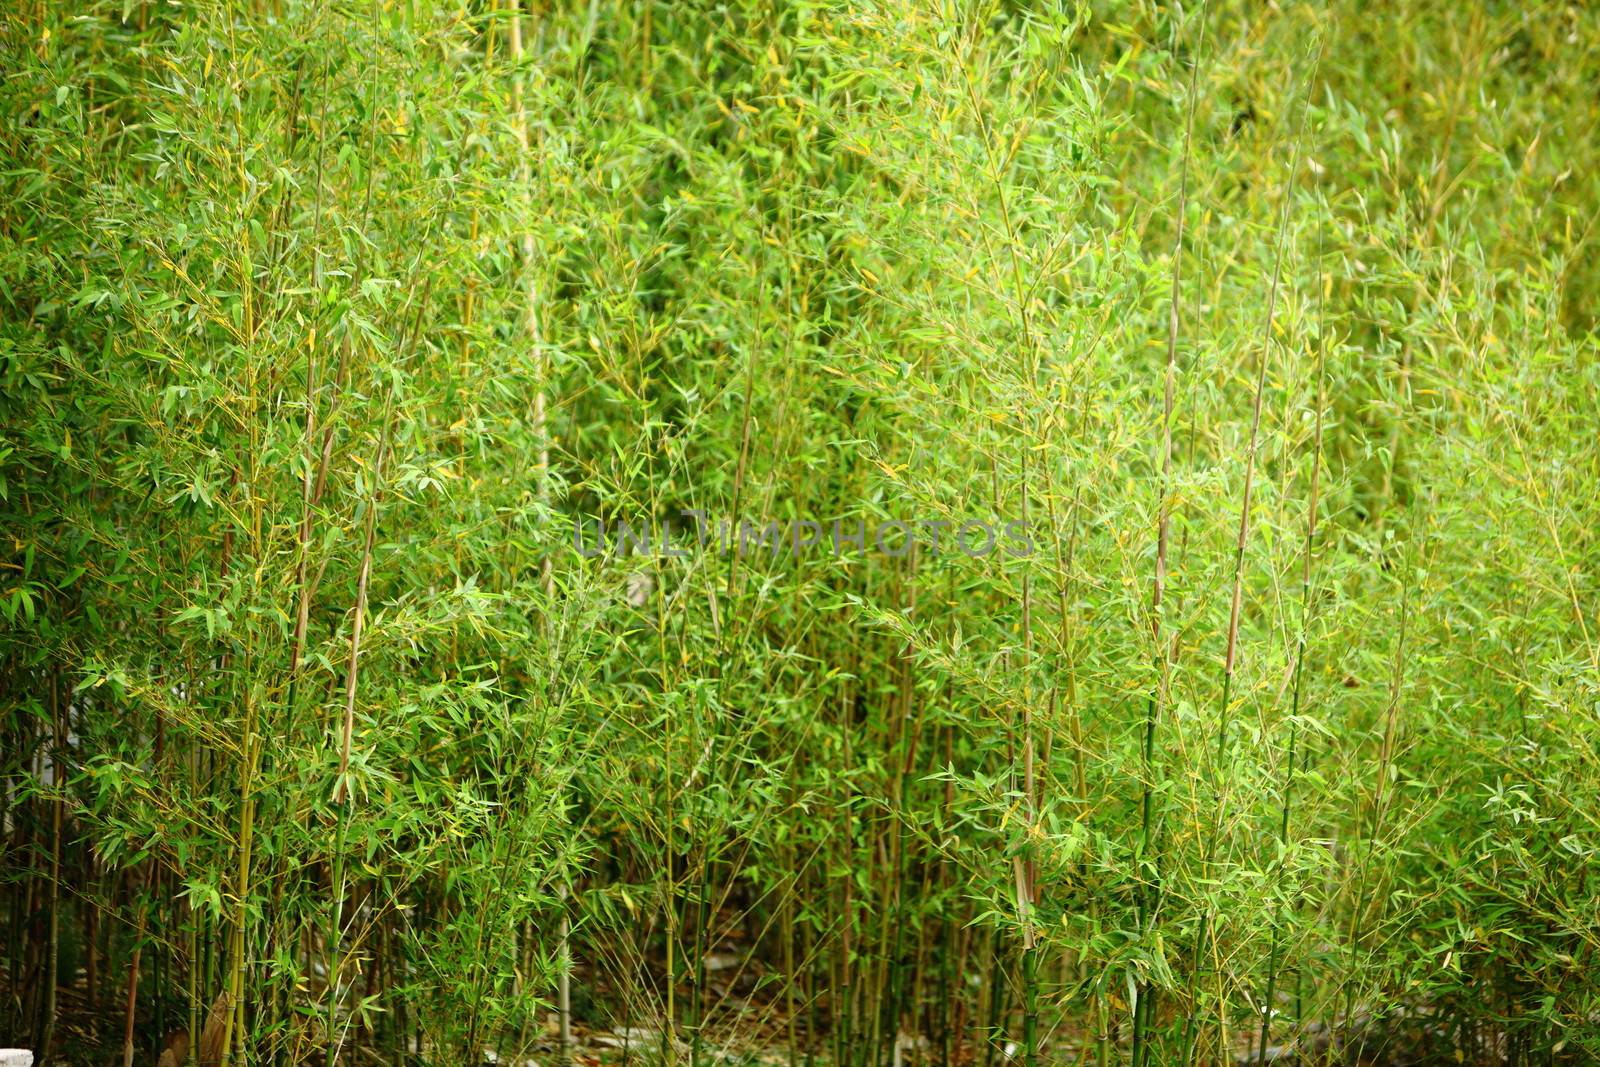 Stand of fresh young ornamental bamboo with a vibrant green colour growing outdoors in a garden